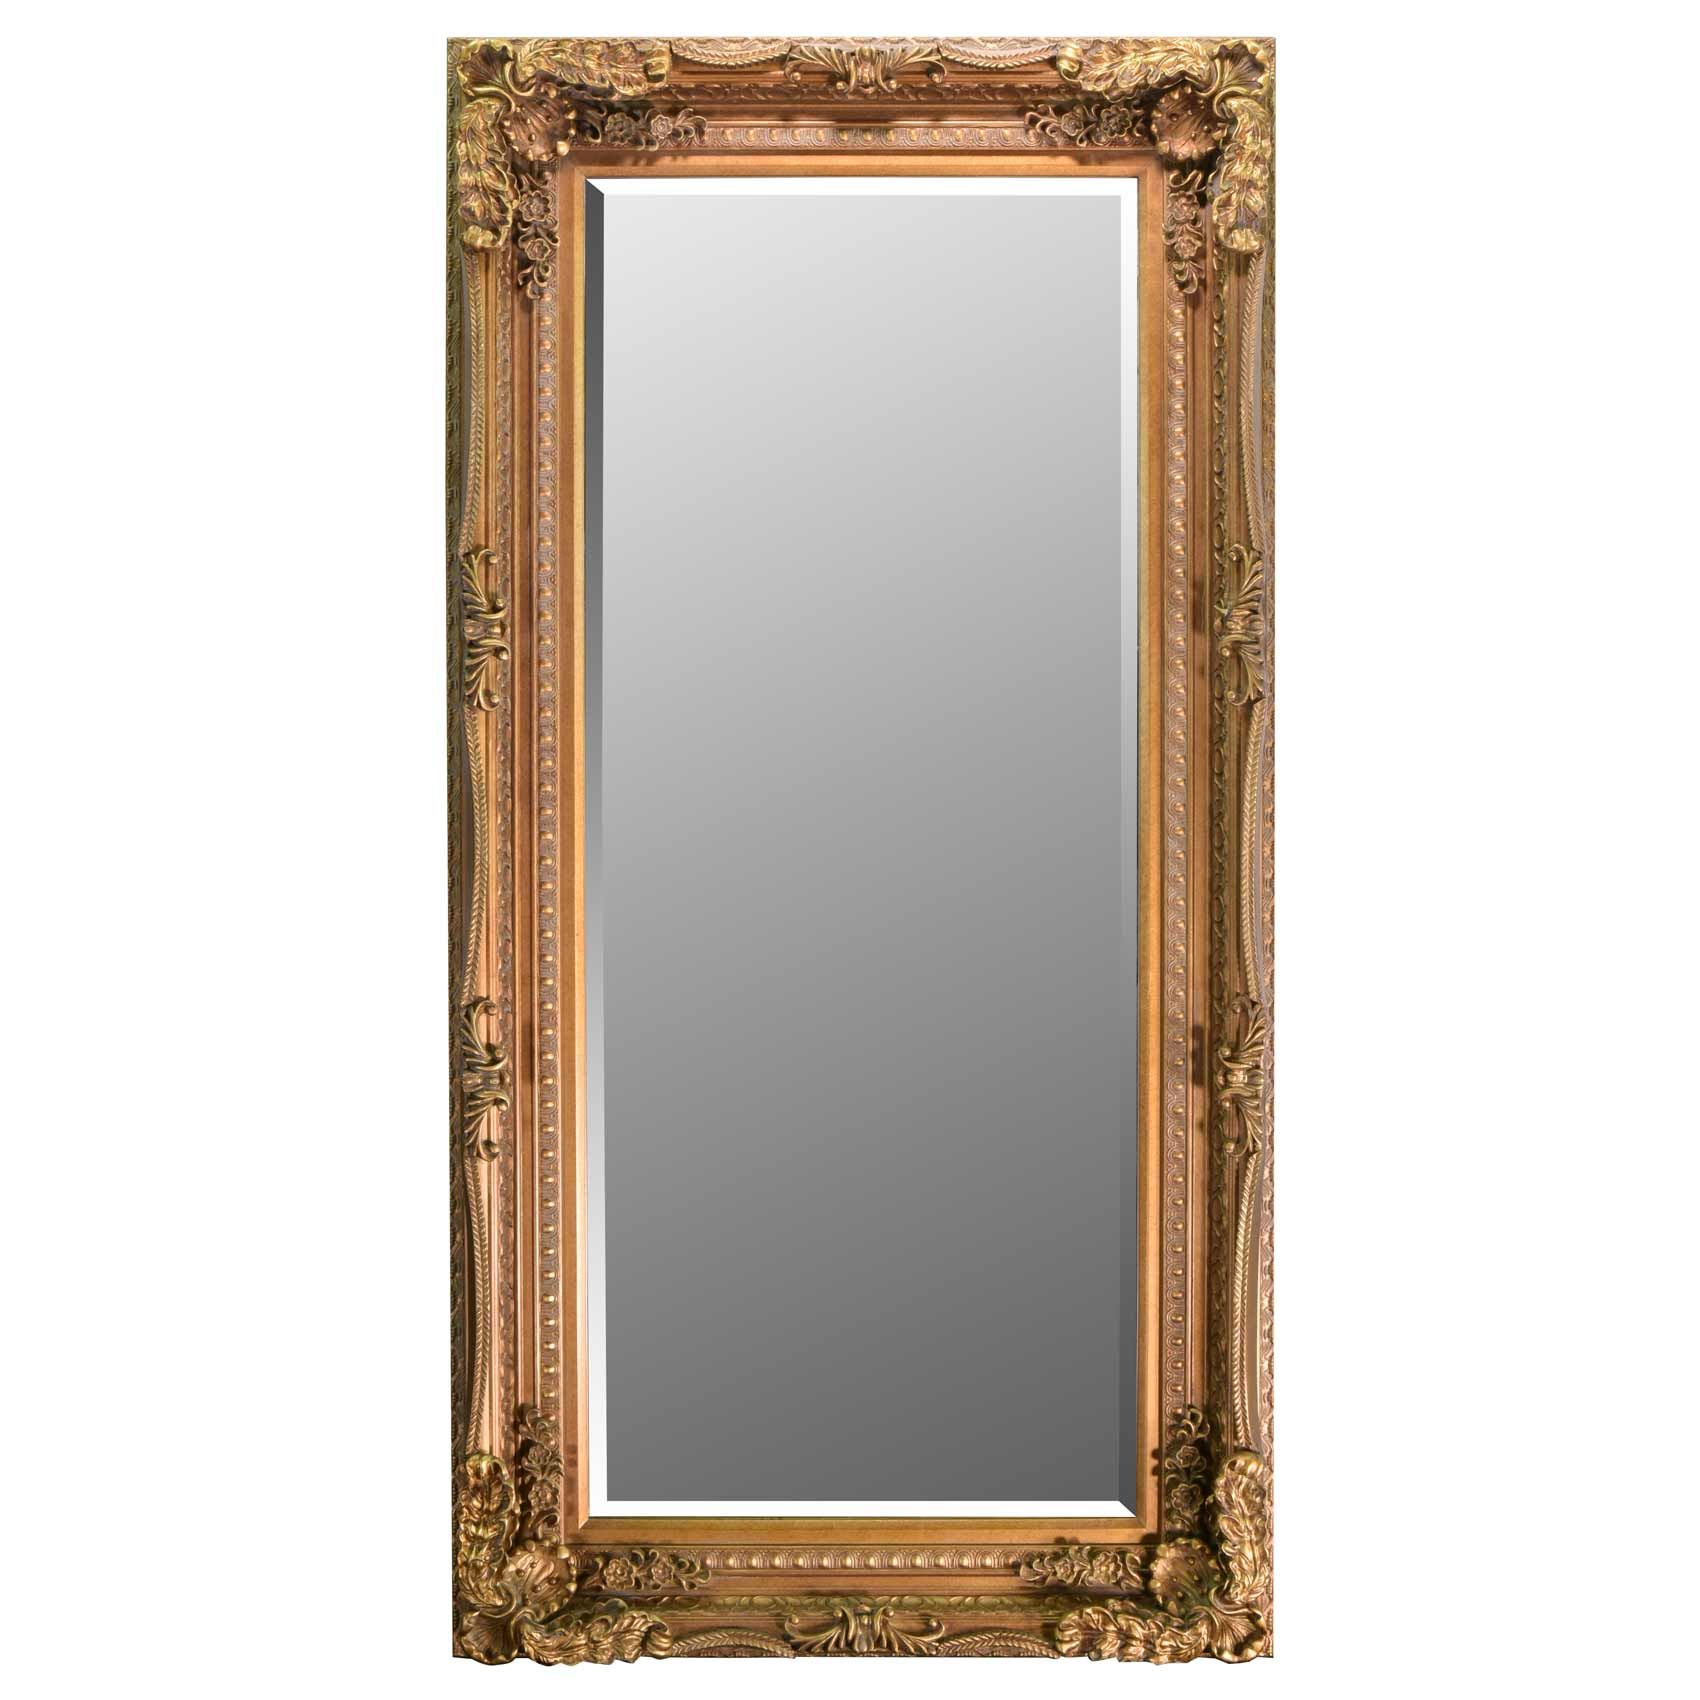 Large Lois Leaner Antique Full Length Gold Wall Mirror 5ft9 X 2ft11 Regarding Ultra Brushed Gold Rectangular Framed Wall Mirrors (View 9 of 15)